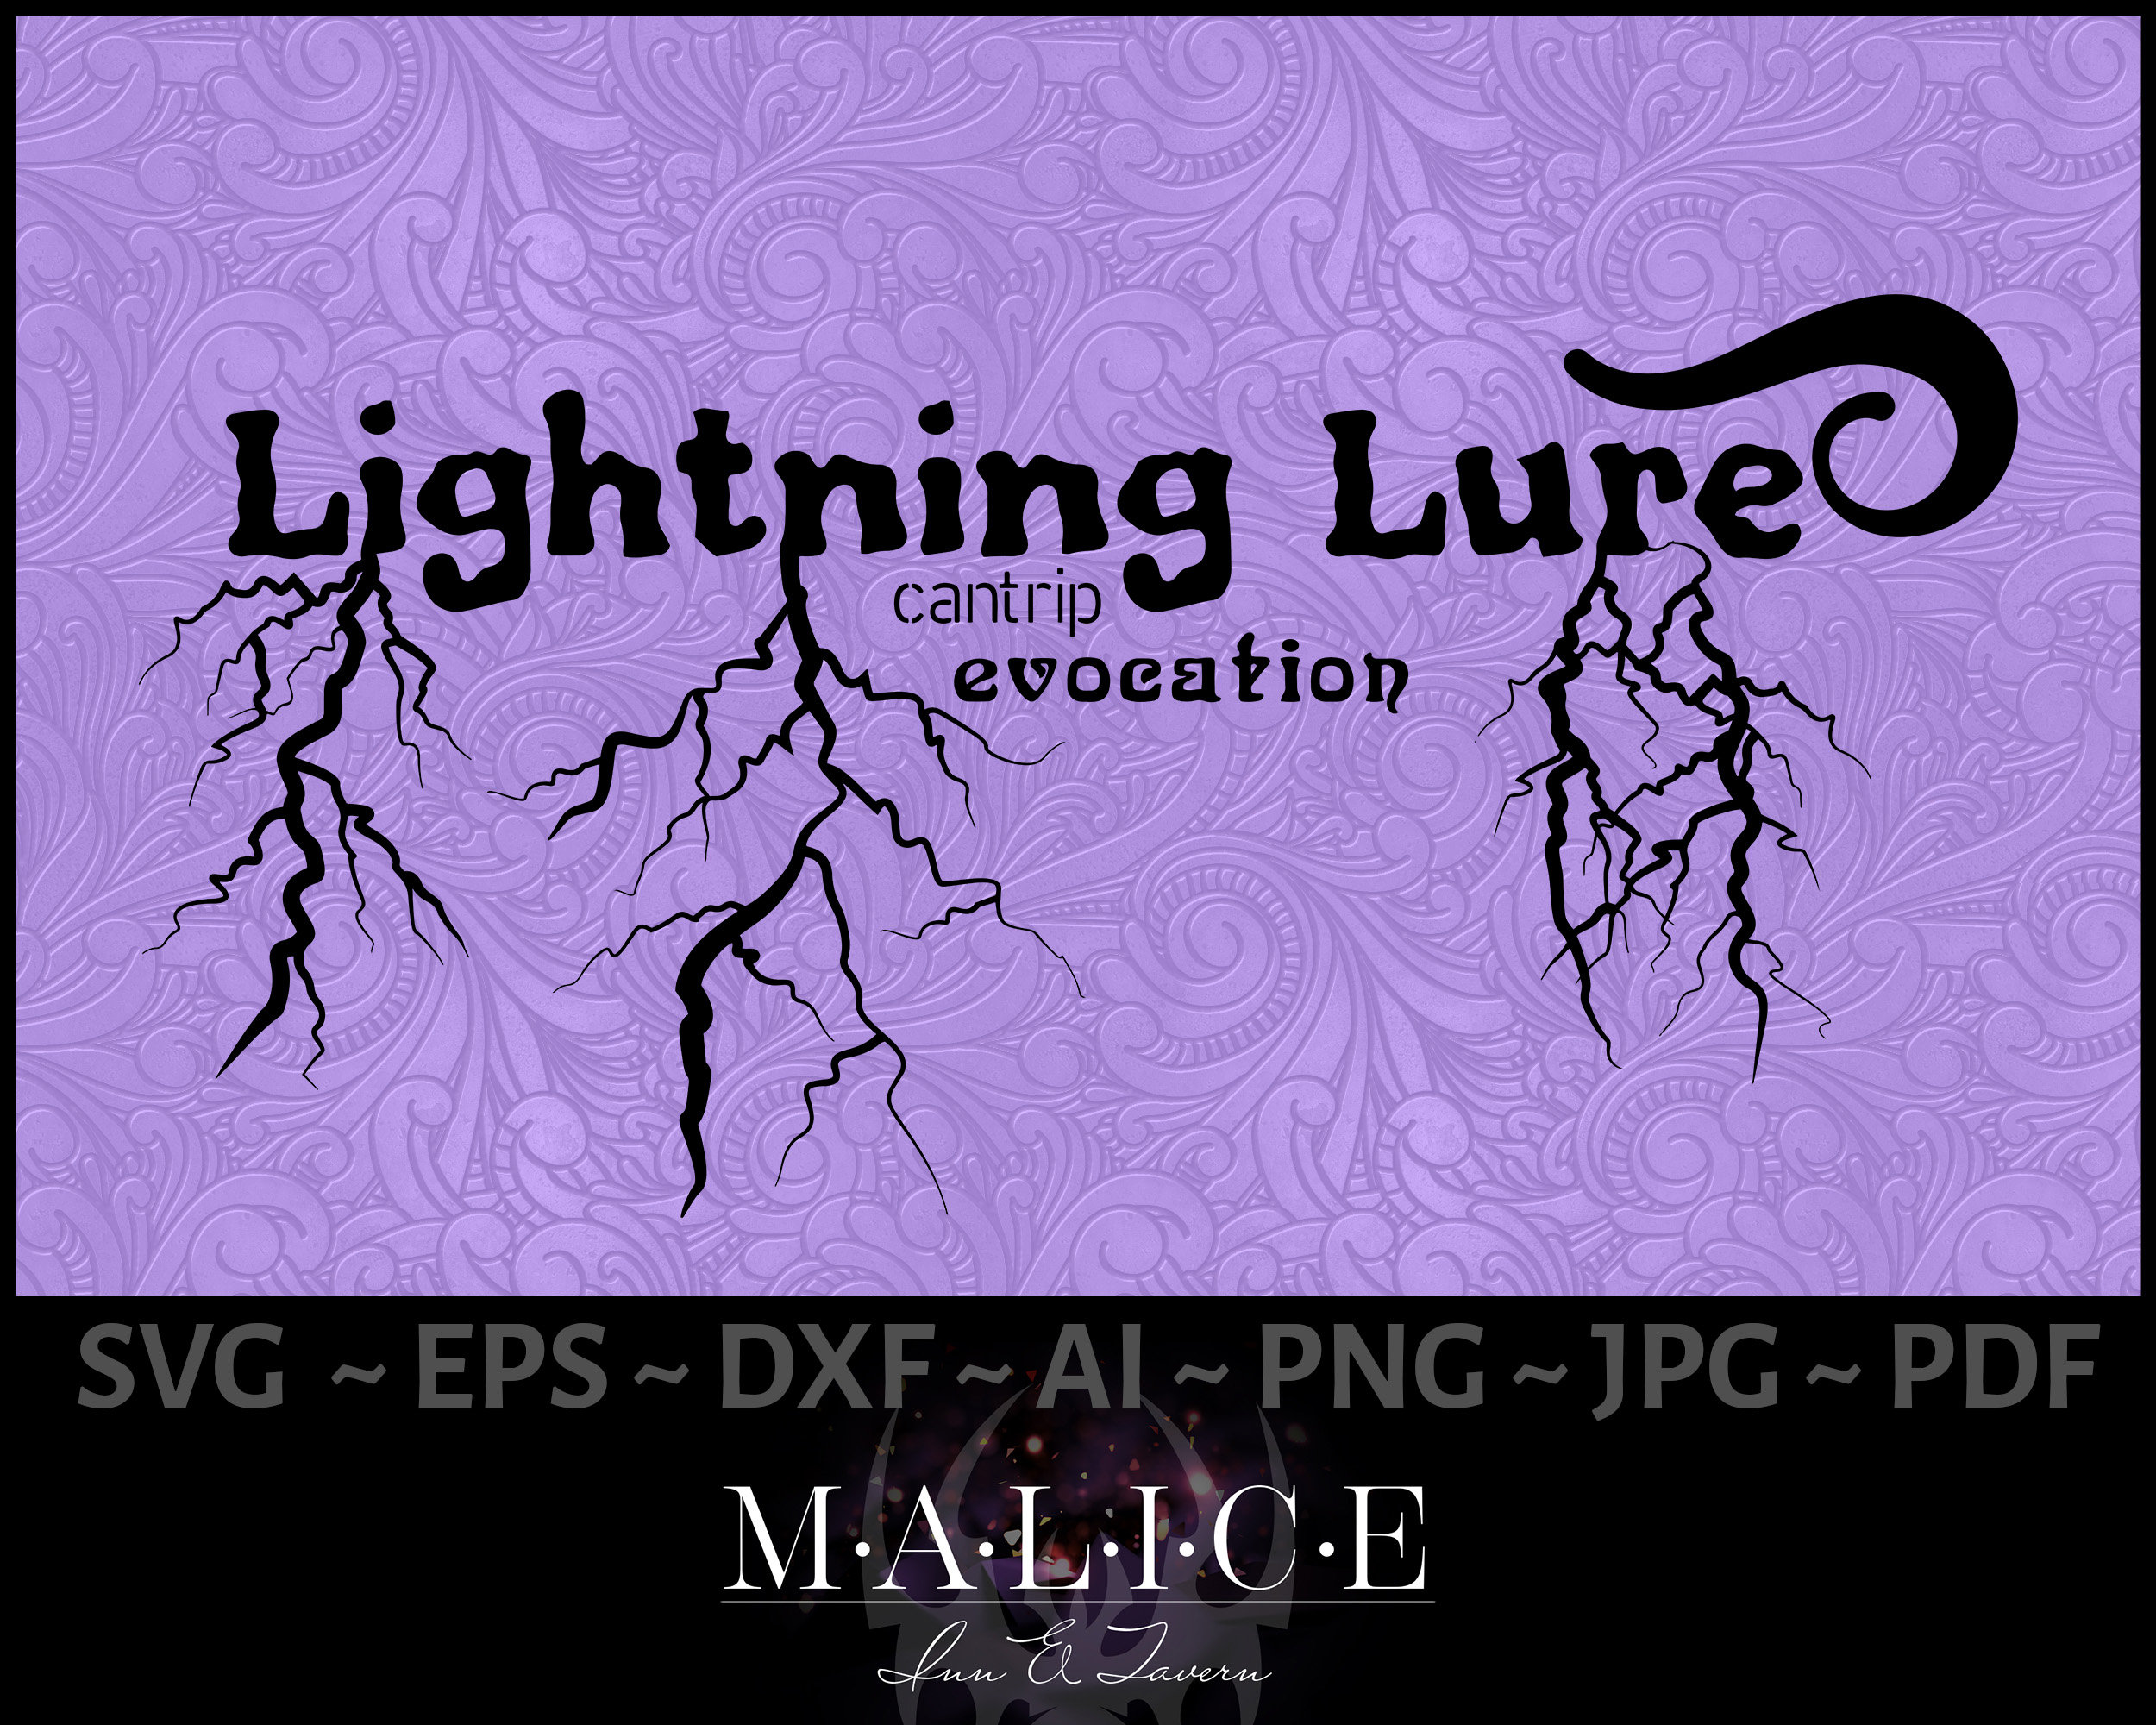 Lightning Lure Cantrip Vector for Spell Cards Book Dungeons - Etsy